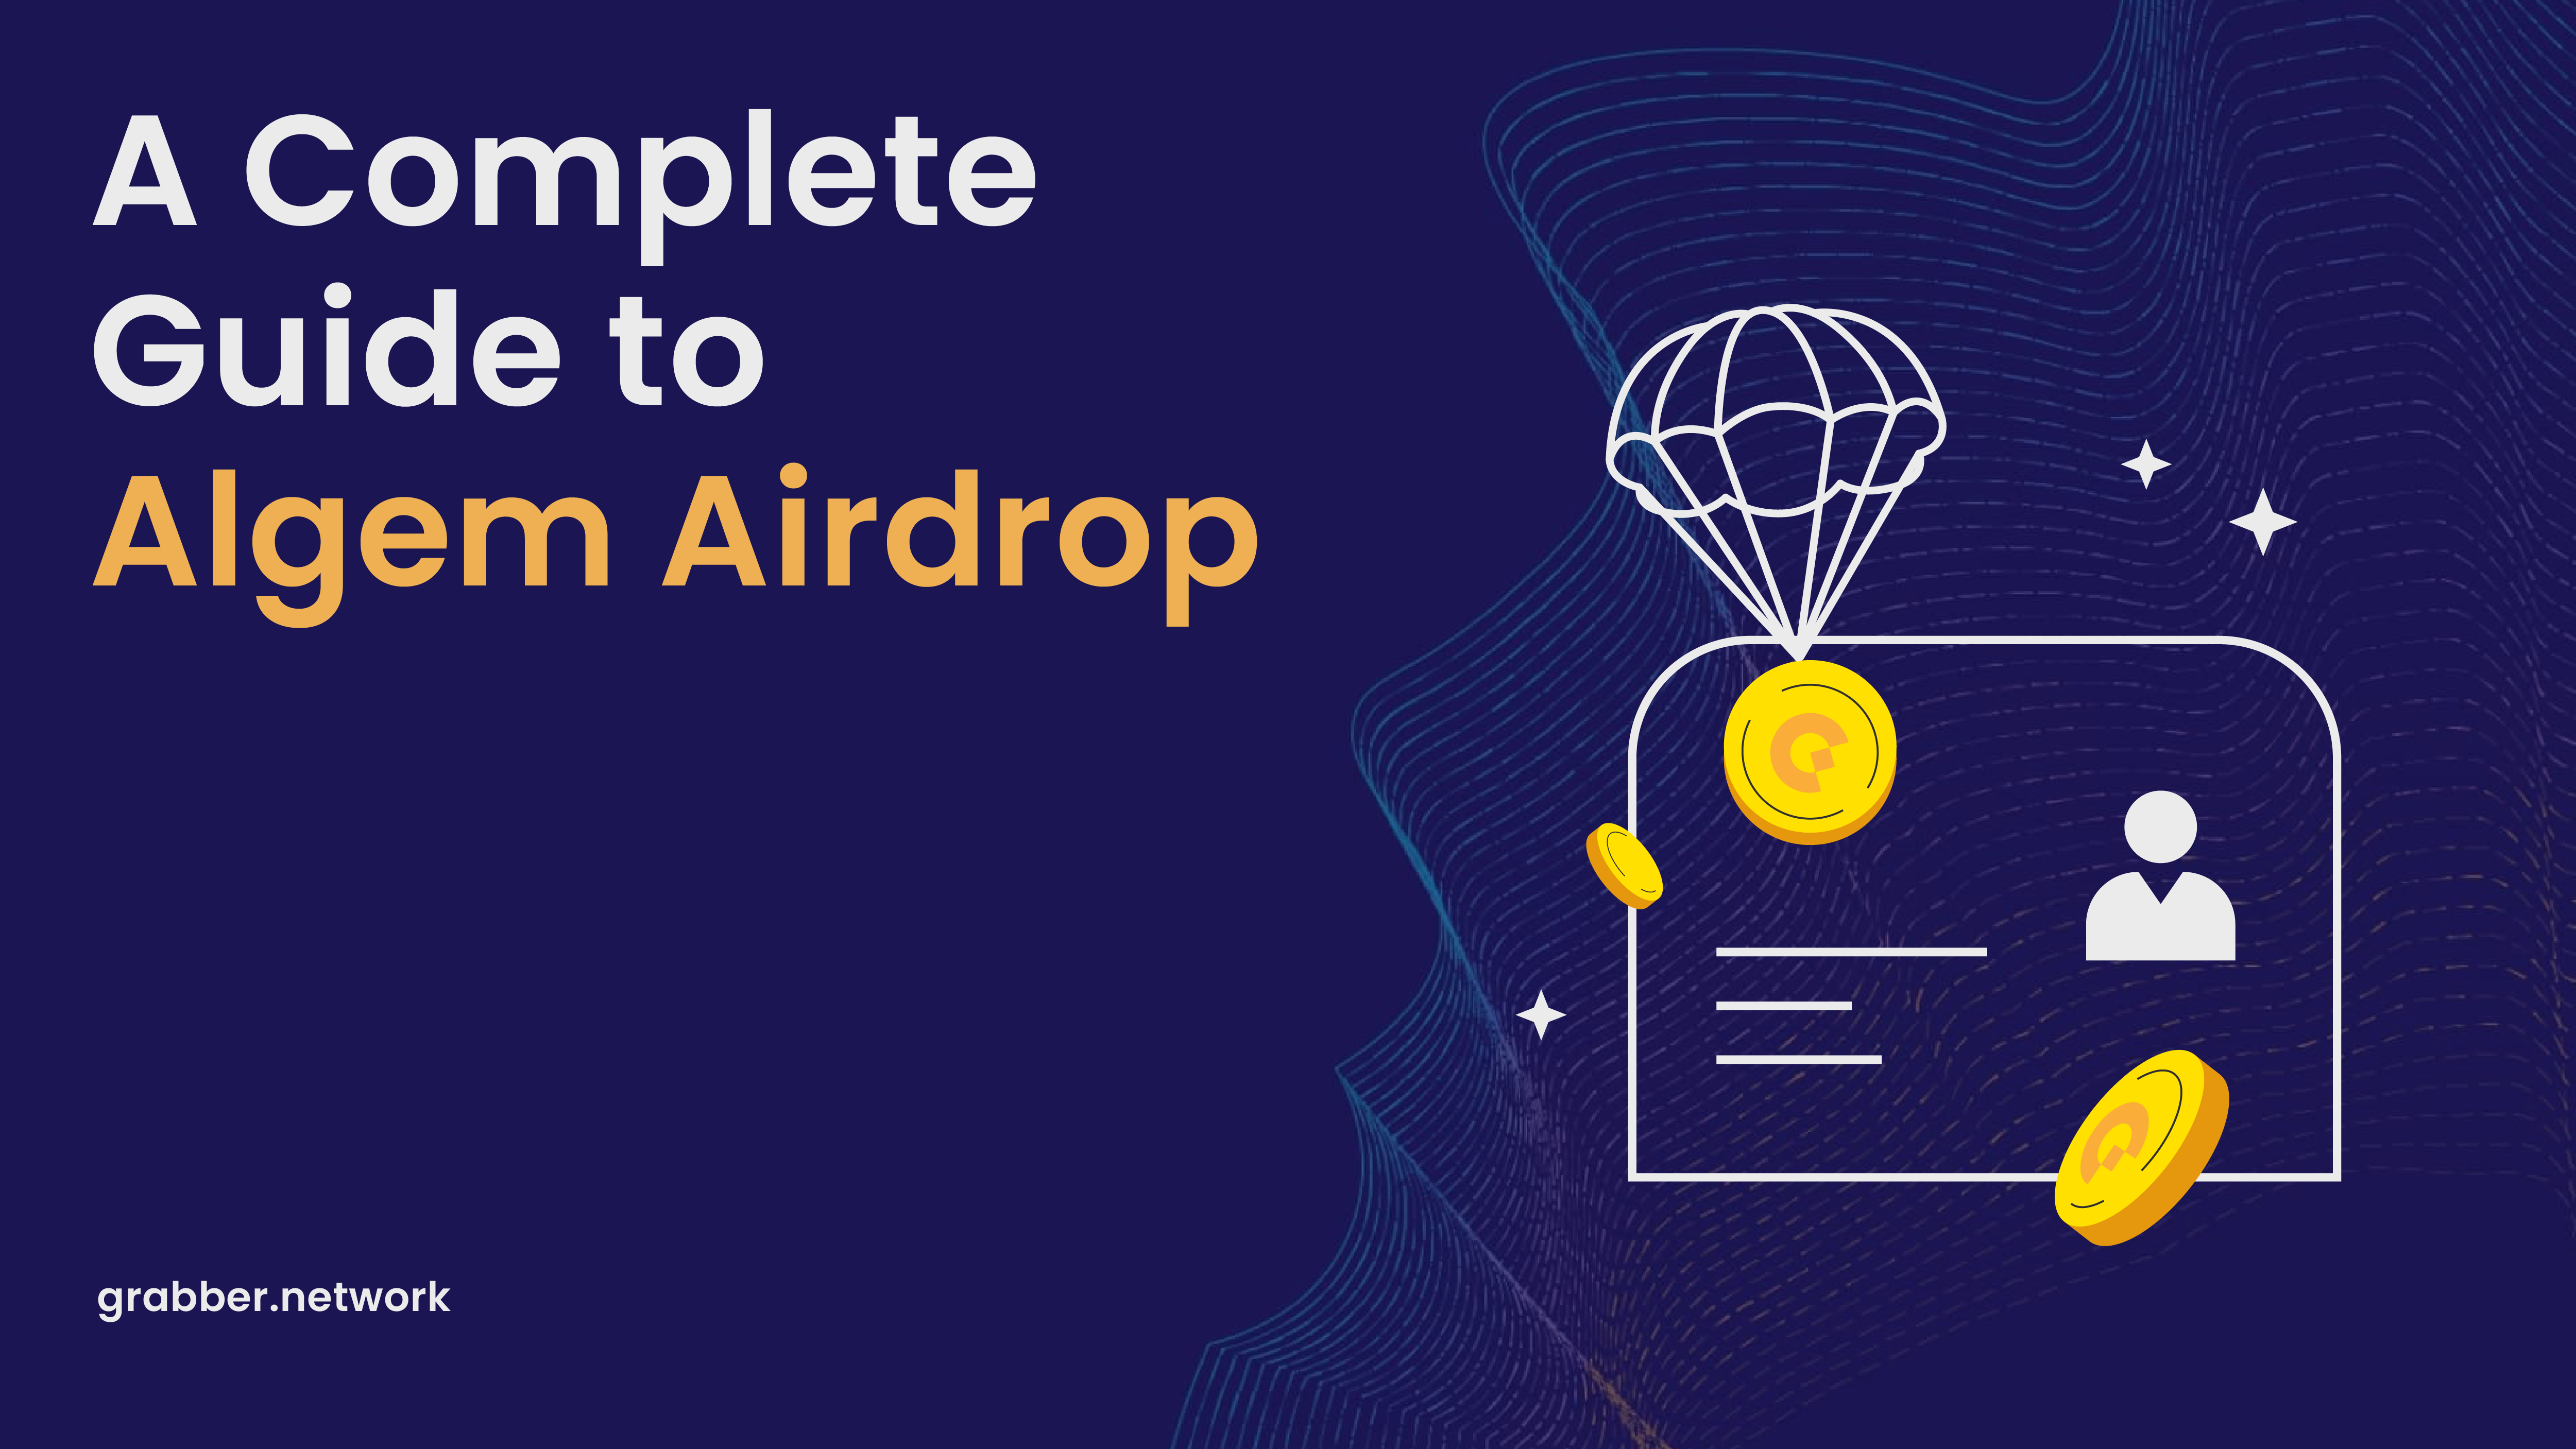 A Complete Guide to Algem Airdrop